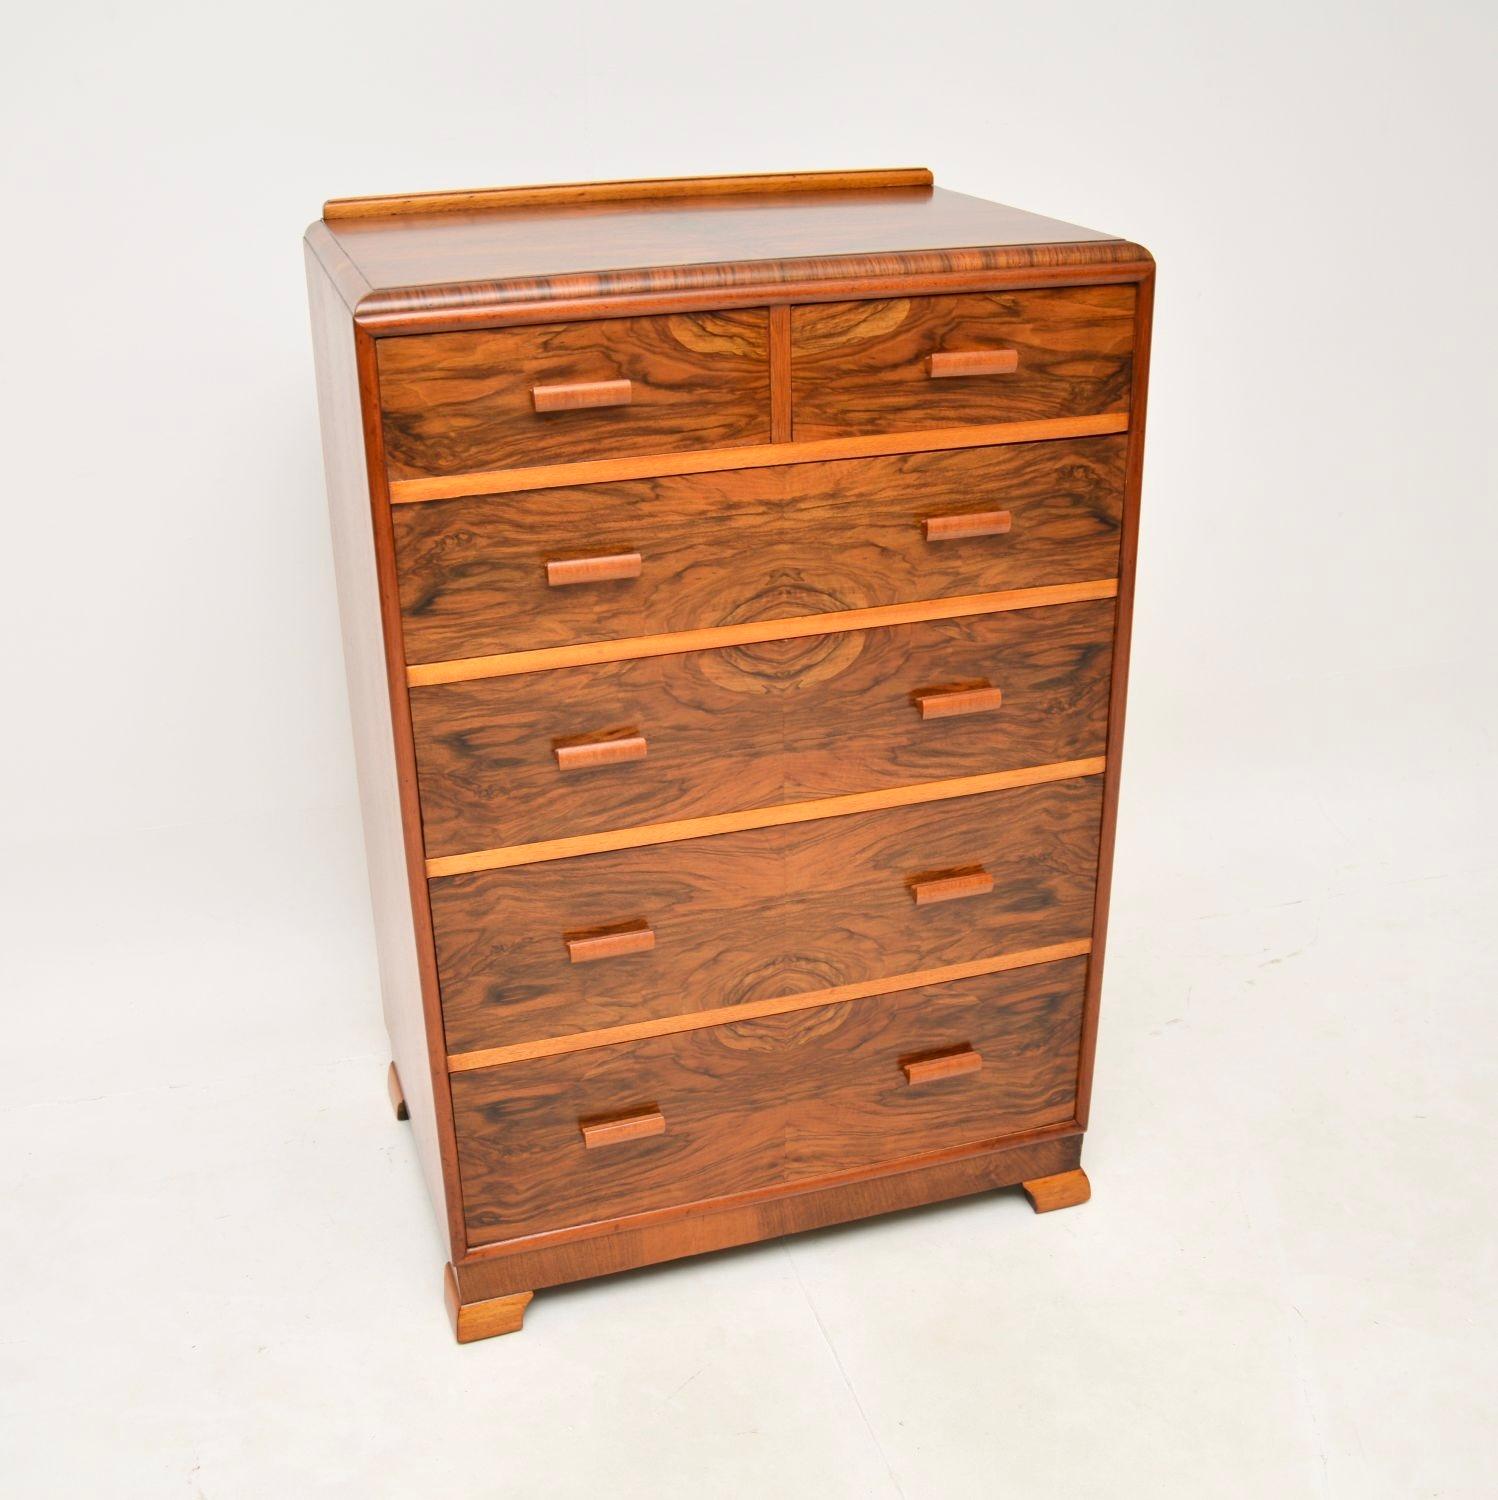 A stunning Art Deco figured walnut chest of drawers. This was made in England, it dates from the 1920-30’s.

The quality is superb, this is extremely well made and is a great size, with lots of storage space. The walnut grain patterns and colour